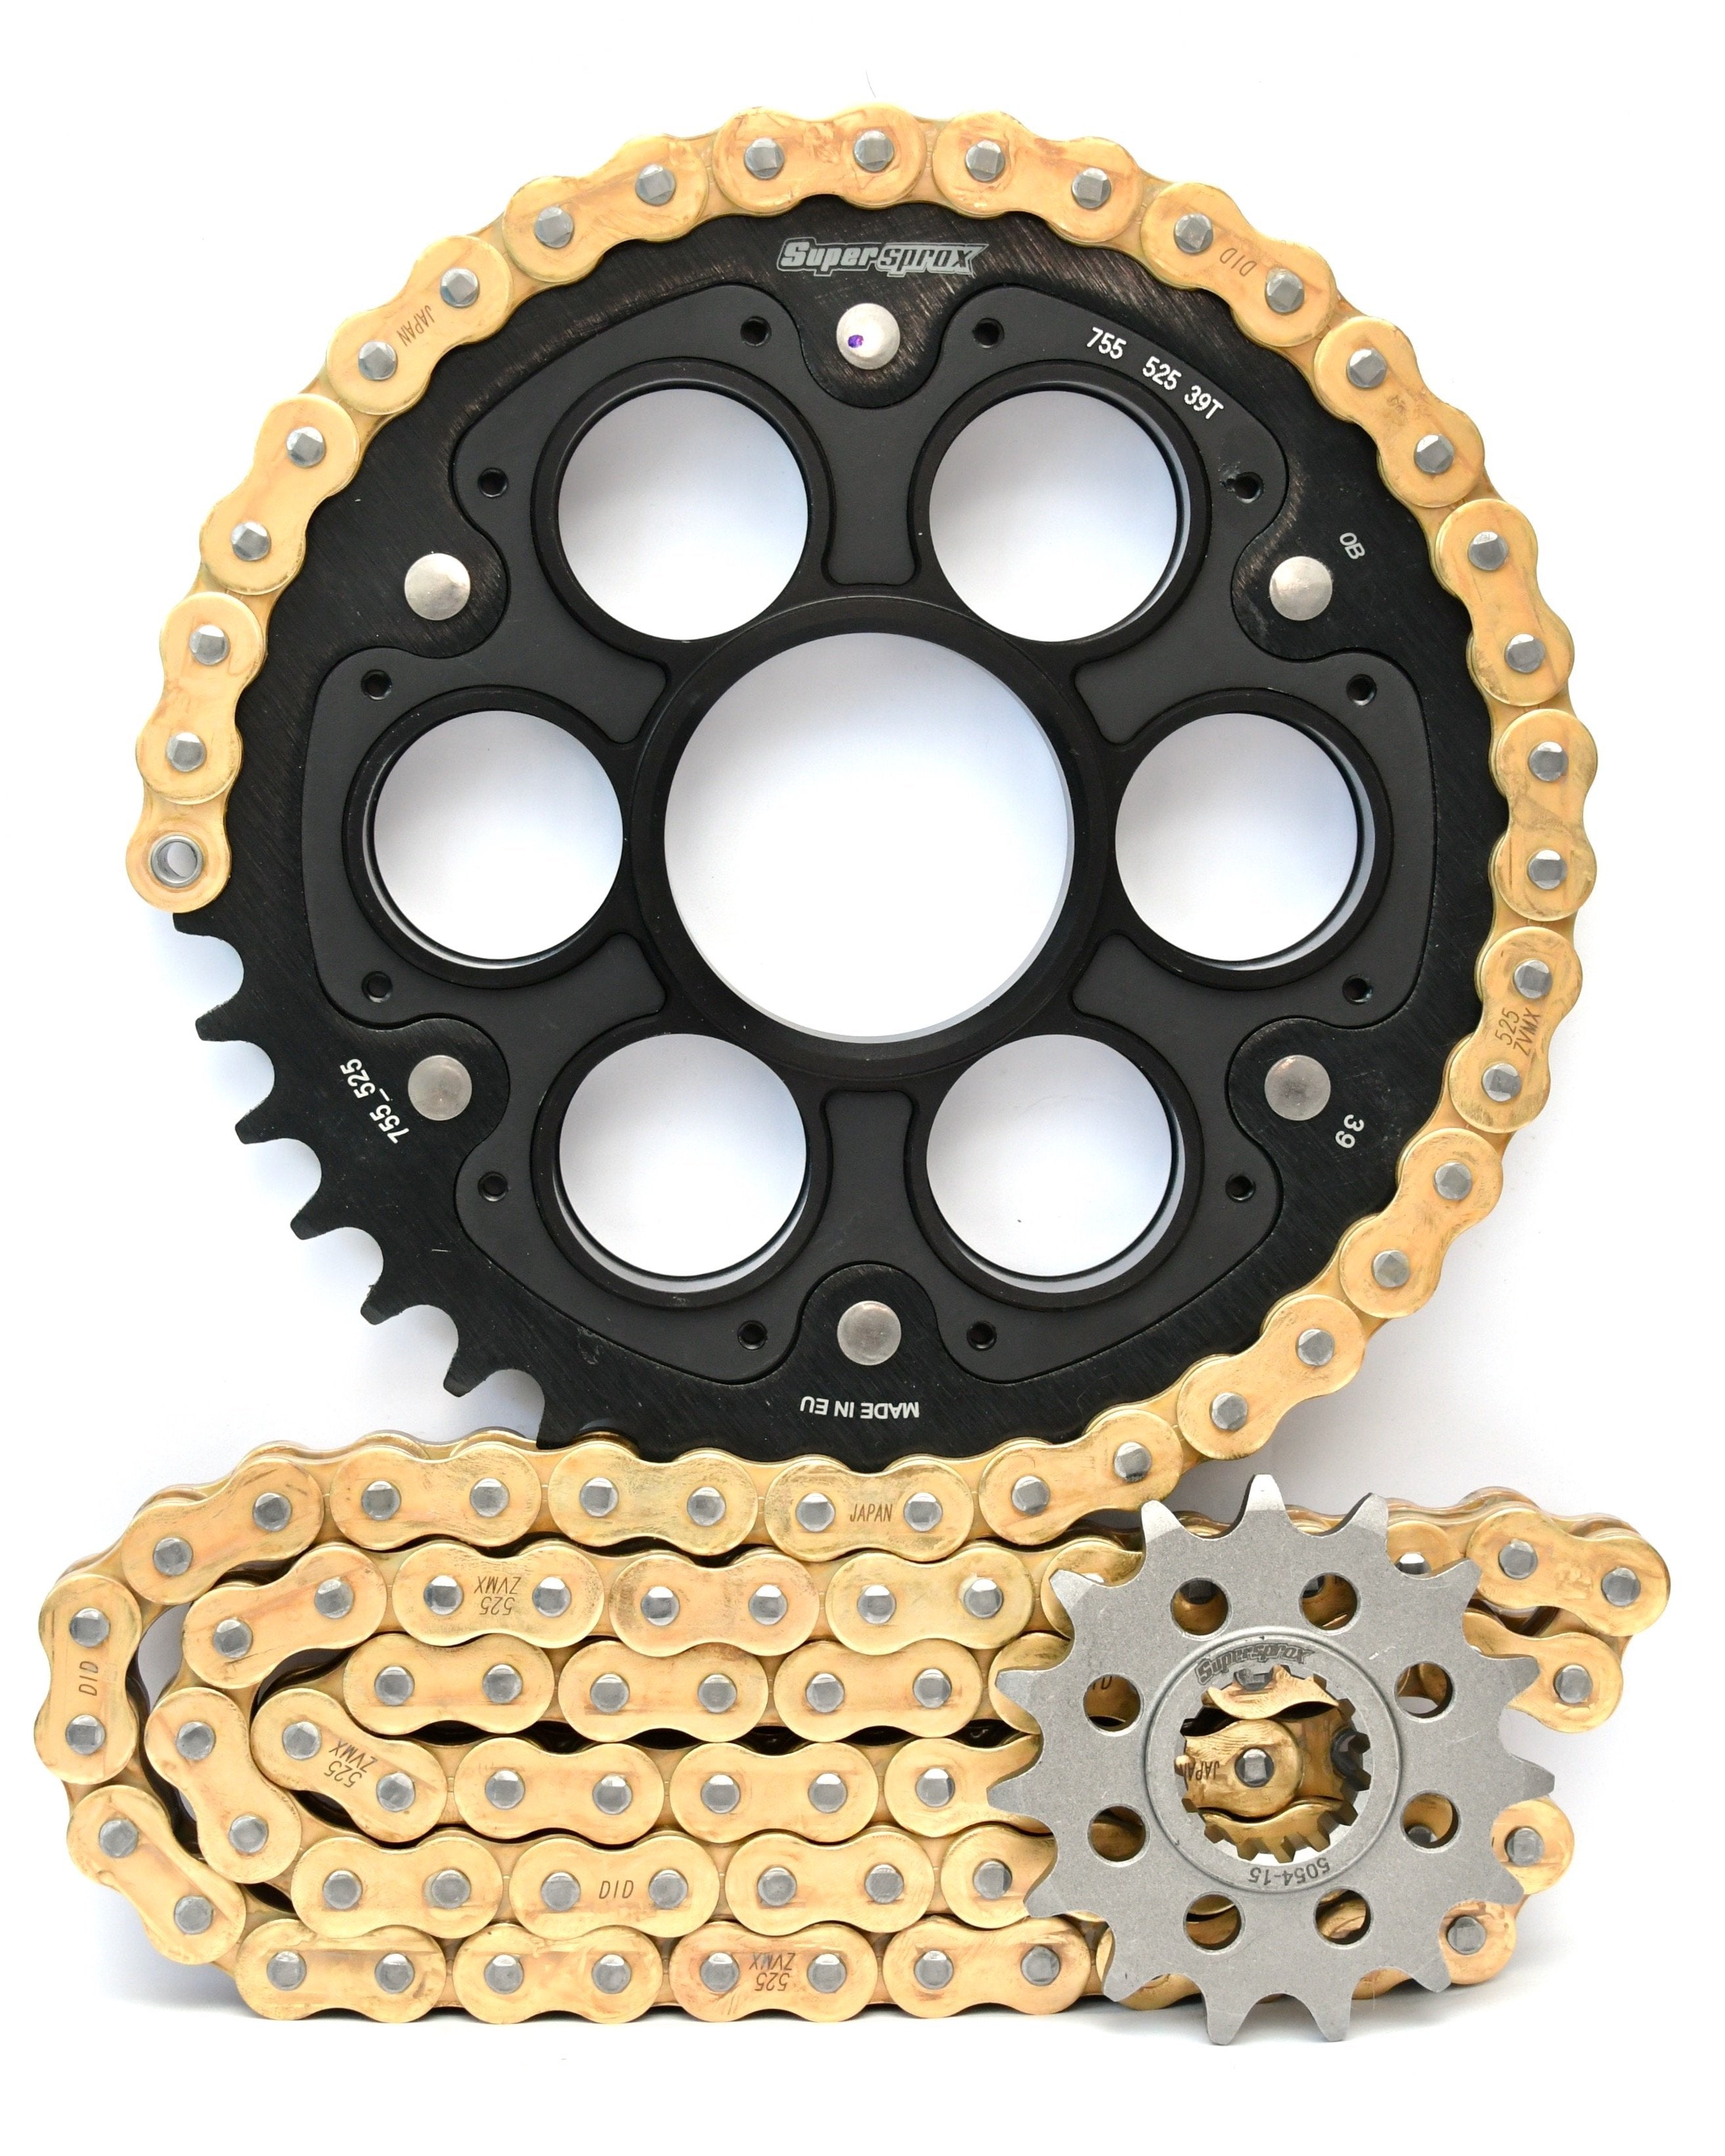 Supersprox Chain & Sprocket Kit for Ducati Diavel 1198 2011-2018 - Standard Gearing